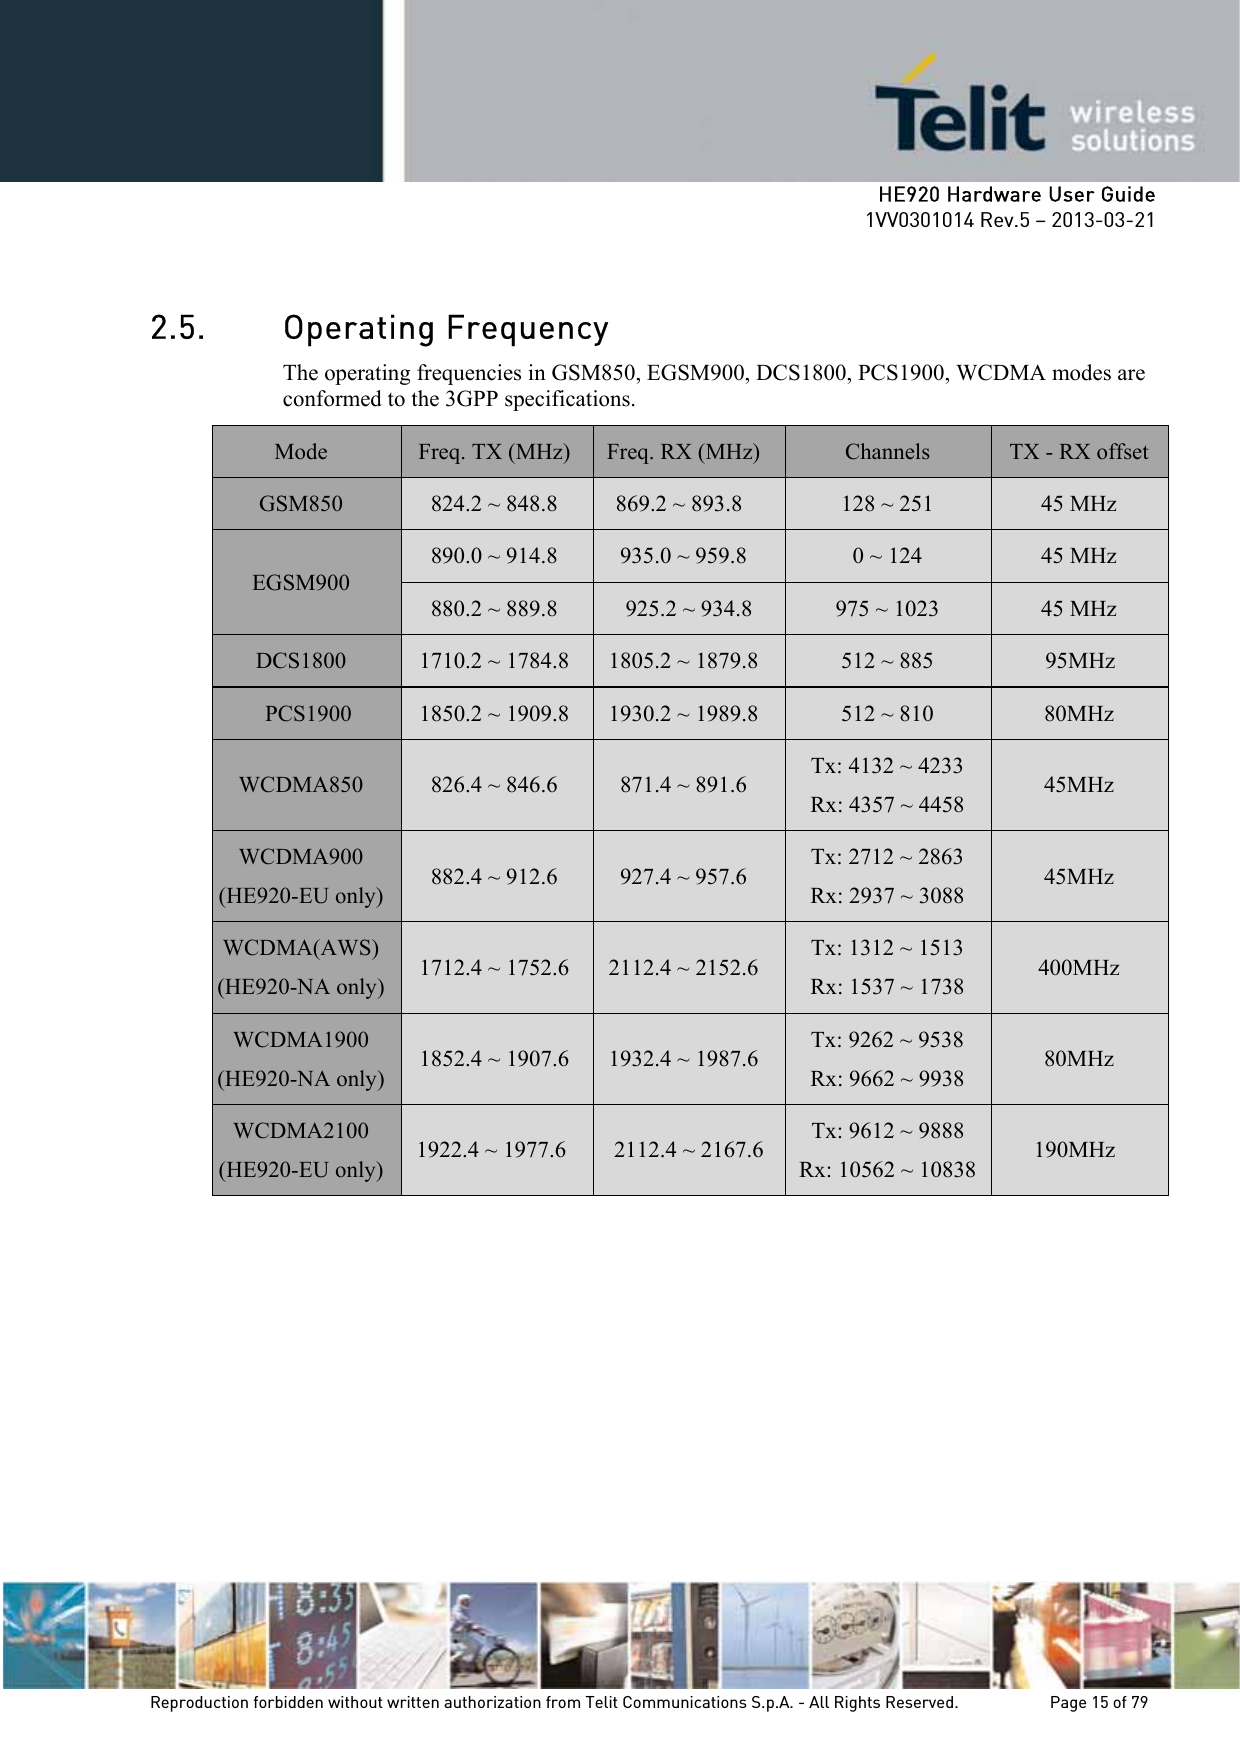     HE920 Hardware User Guide 1VV0301014 Rev.5 – 2013-03-21 Reproduction forbidden without written authorization from Telit Communications S.p.A. - All Rights Reserved.    Page 15 of 79  2.5. Operating Frequency The operating frequencies in GSM850, EGSM900, DCS1800, PCS1900, WCDMA modes are conformed to the 3GPP specifications. Mode  Freq. TX (MHz)  Freq. RX (MHz)  Channels  TX - RX offset GSM850  824.2 ~ 848.8   869.2 ~ 893.8  128 ~ 251  45 MHz EGSM900 890.0 ~ 914.8  935.0 ~ 959.8  0 ~ 124  45 MHz 880.2 ~ 889.8  925.2 ~ 934.8  975 ~ 1023  45 MHz DCS1800  1710.2 ~ 1784.8  1805.2 ~ 1879.8  512 ~ 885  95MHz PCS1900  1850.2 ~ 1909.8  1930.2 ~ 1989.8  512 ~ 810  80MHz WCDMA850  826.4 ~ 846.6  871.4 ~ 891.6  Tx: 4132 ~ 4233 Rx: 4357 ~ 4458  45MHz WCDMA900 (HE920-EU only) 882.4 ~ 912.6  927.4 ~ 957.6  Tx: 2712 ~ 2863 Rx: 2937 ~ 3088  45MHz WCDMA(AWS) (HE920-NA only)  1712.4 ~ 1752.6  2112.4 ~ 2152.6  Tx: 1312 ~ 1513 Rx: 1537 ~ 1738  400MHz WCDMA1900 (HE920-NA only)  1852.4 ~ 1907.6  1932.4 ~ 1987.6  Tx: 9262 ~ 9538 Rx: 9662 ~ 9938  80MHz WCDMA2100 (HE920-EU only) 1922.4 ~ 1977.6  2112.4 ~ 2167.6  Tx: 9612 ~ 9888 Rx: 10562 ~ 10838  190MHz  